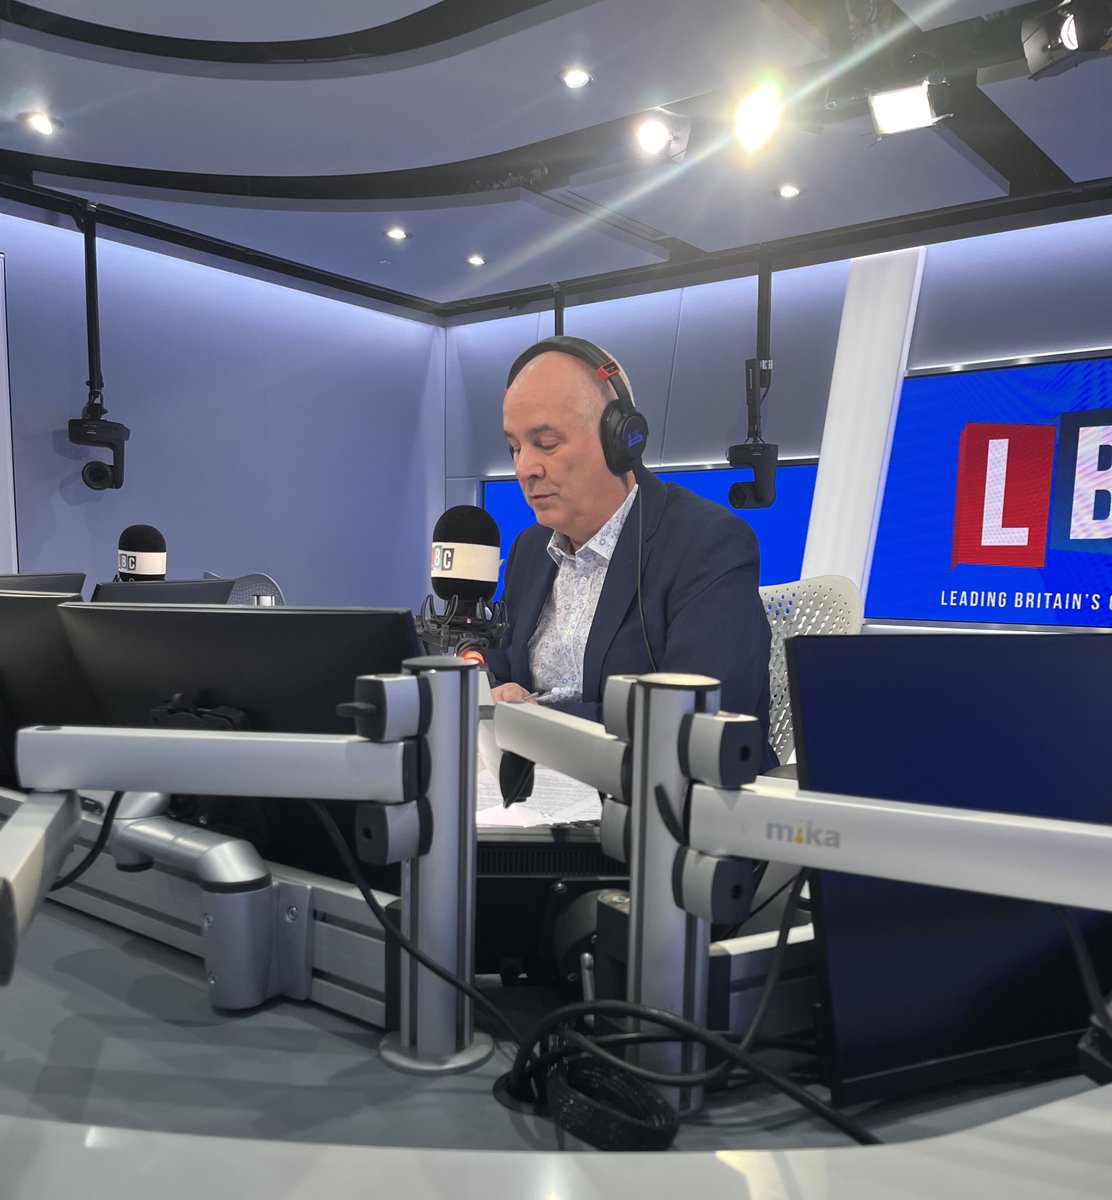 A great man saying goodbye (for now) tonight. @IainDale is a wonderful colleague and a great friend who has been nothing but kind and supportive ever since I joined LBC. I’ll miss him massively, but full of respect for what he’s off to do. Farewell my friend!